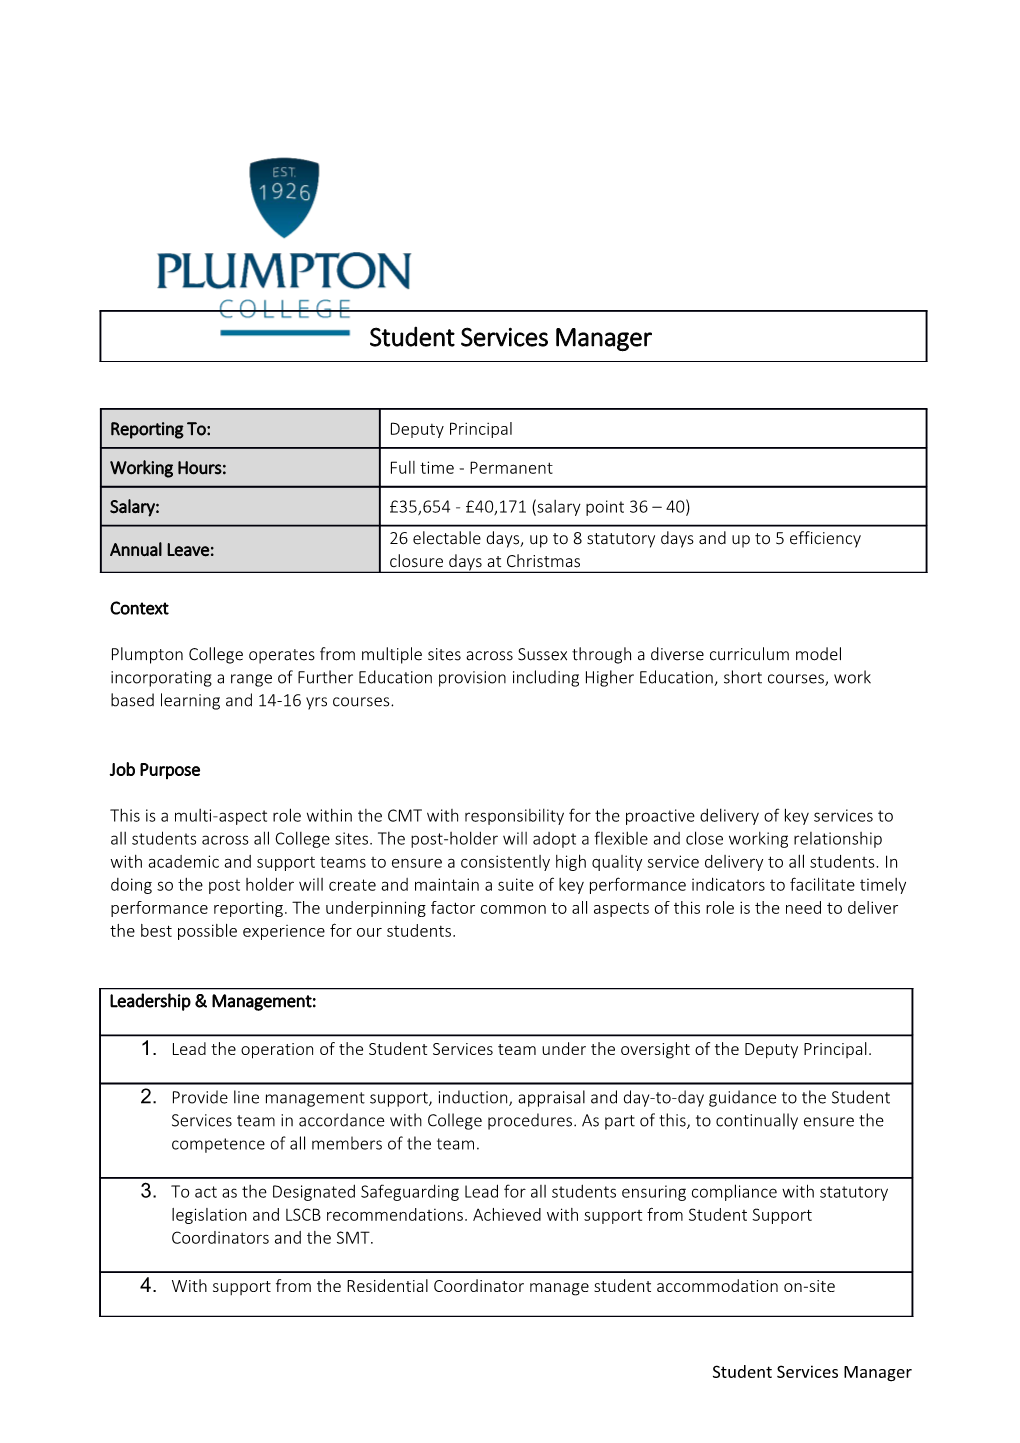 Plumpton College Operates from Multiple Sites Across Sussex Through a Diverse Curriculum